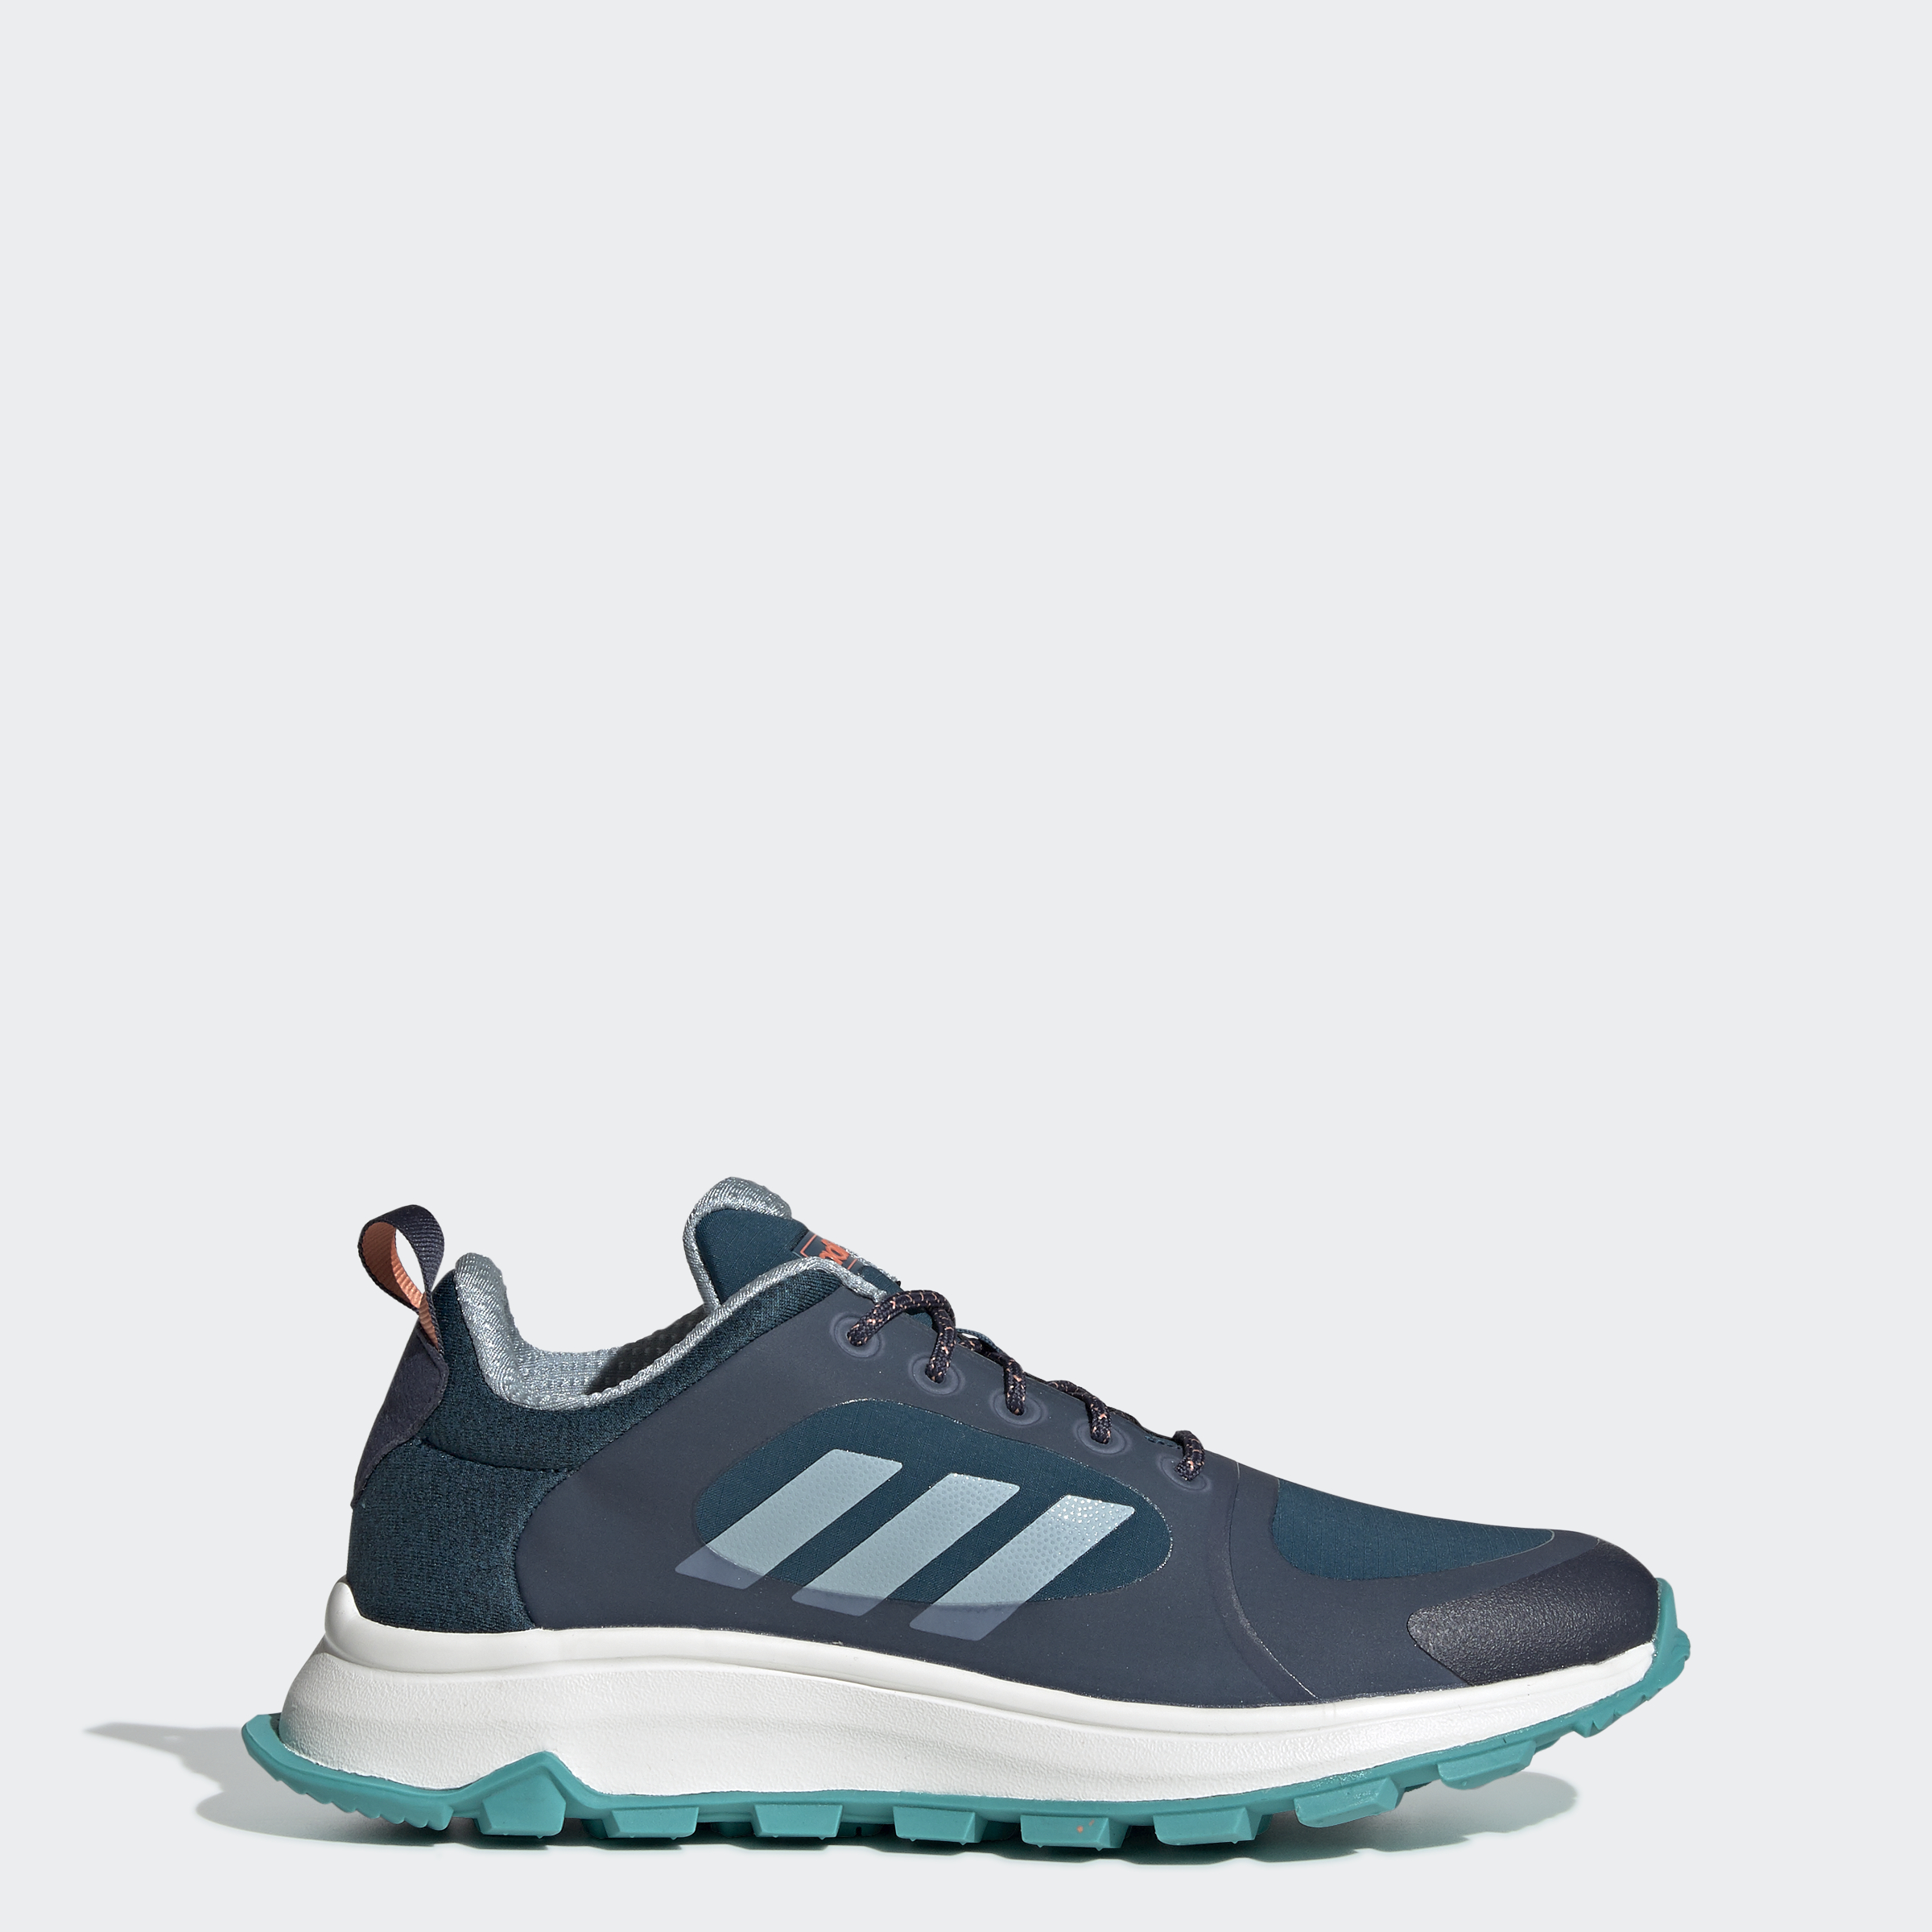 adidas wide shoes womens